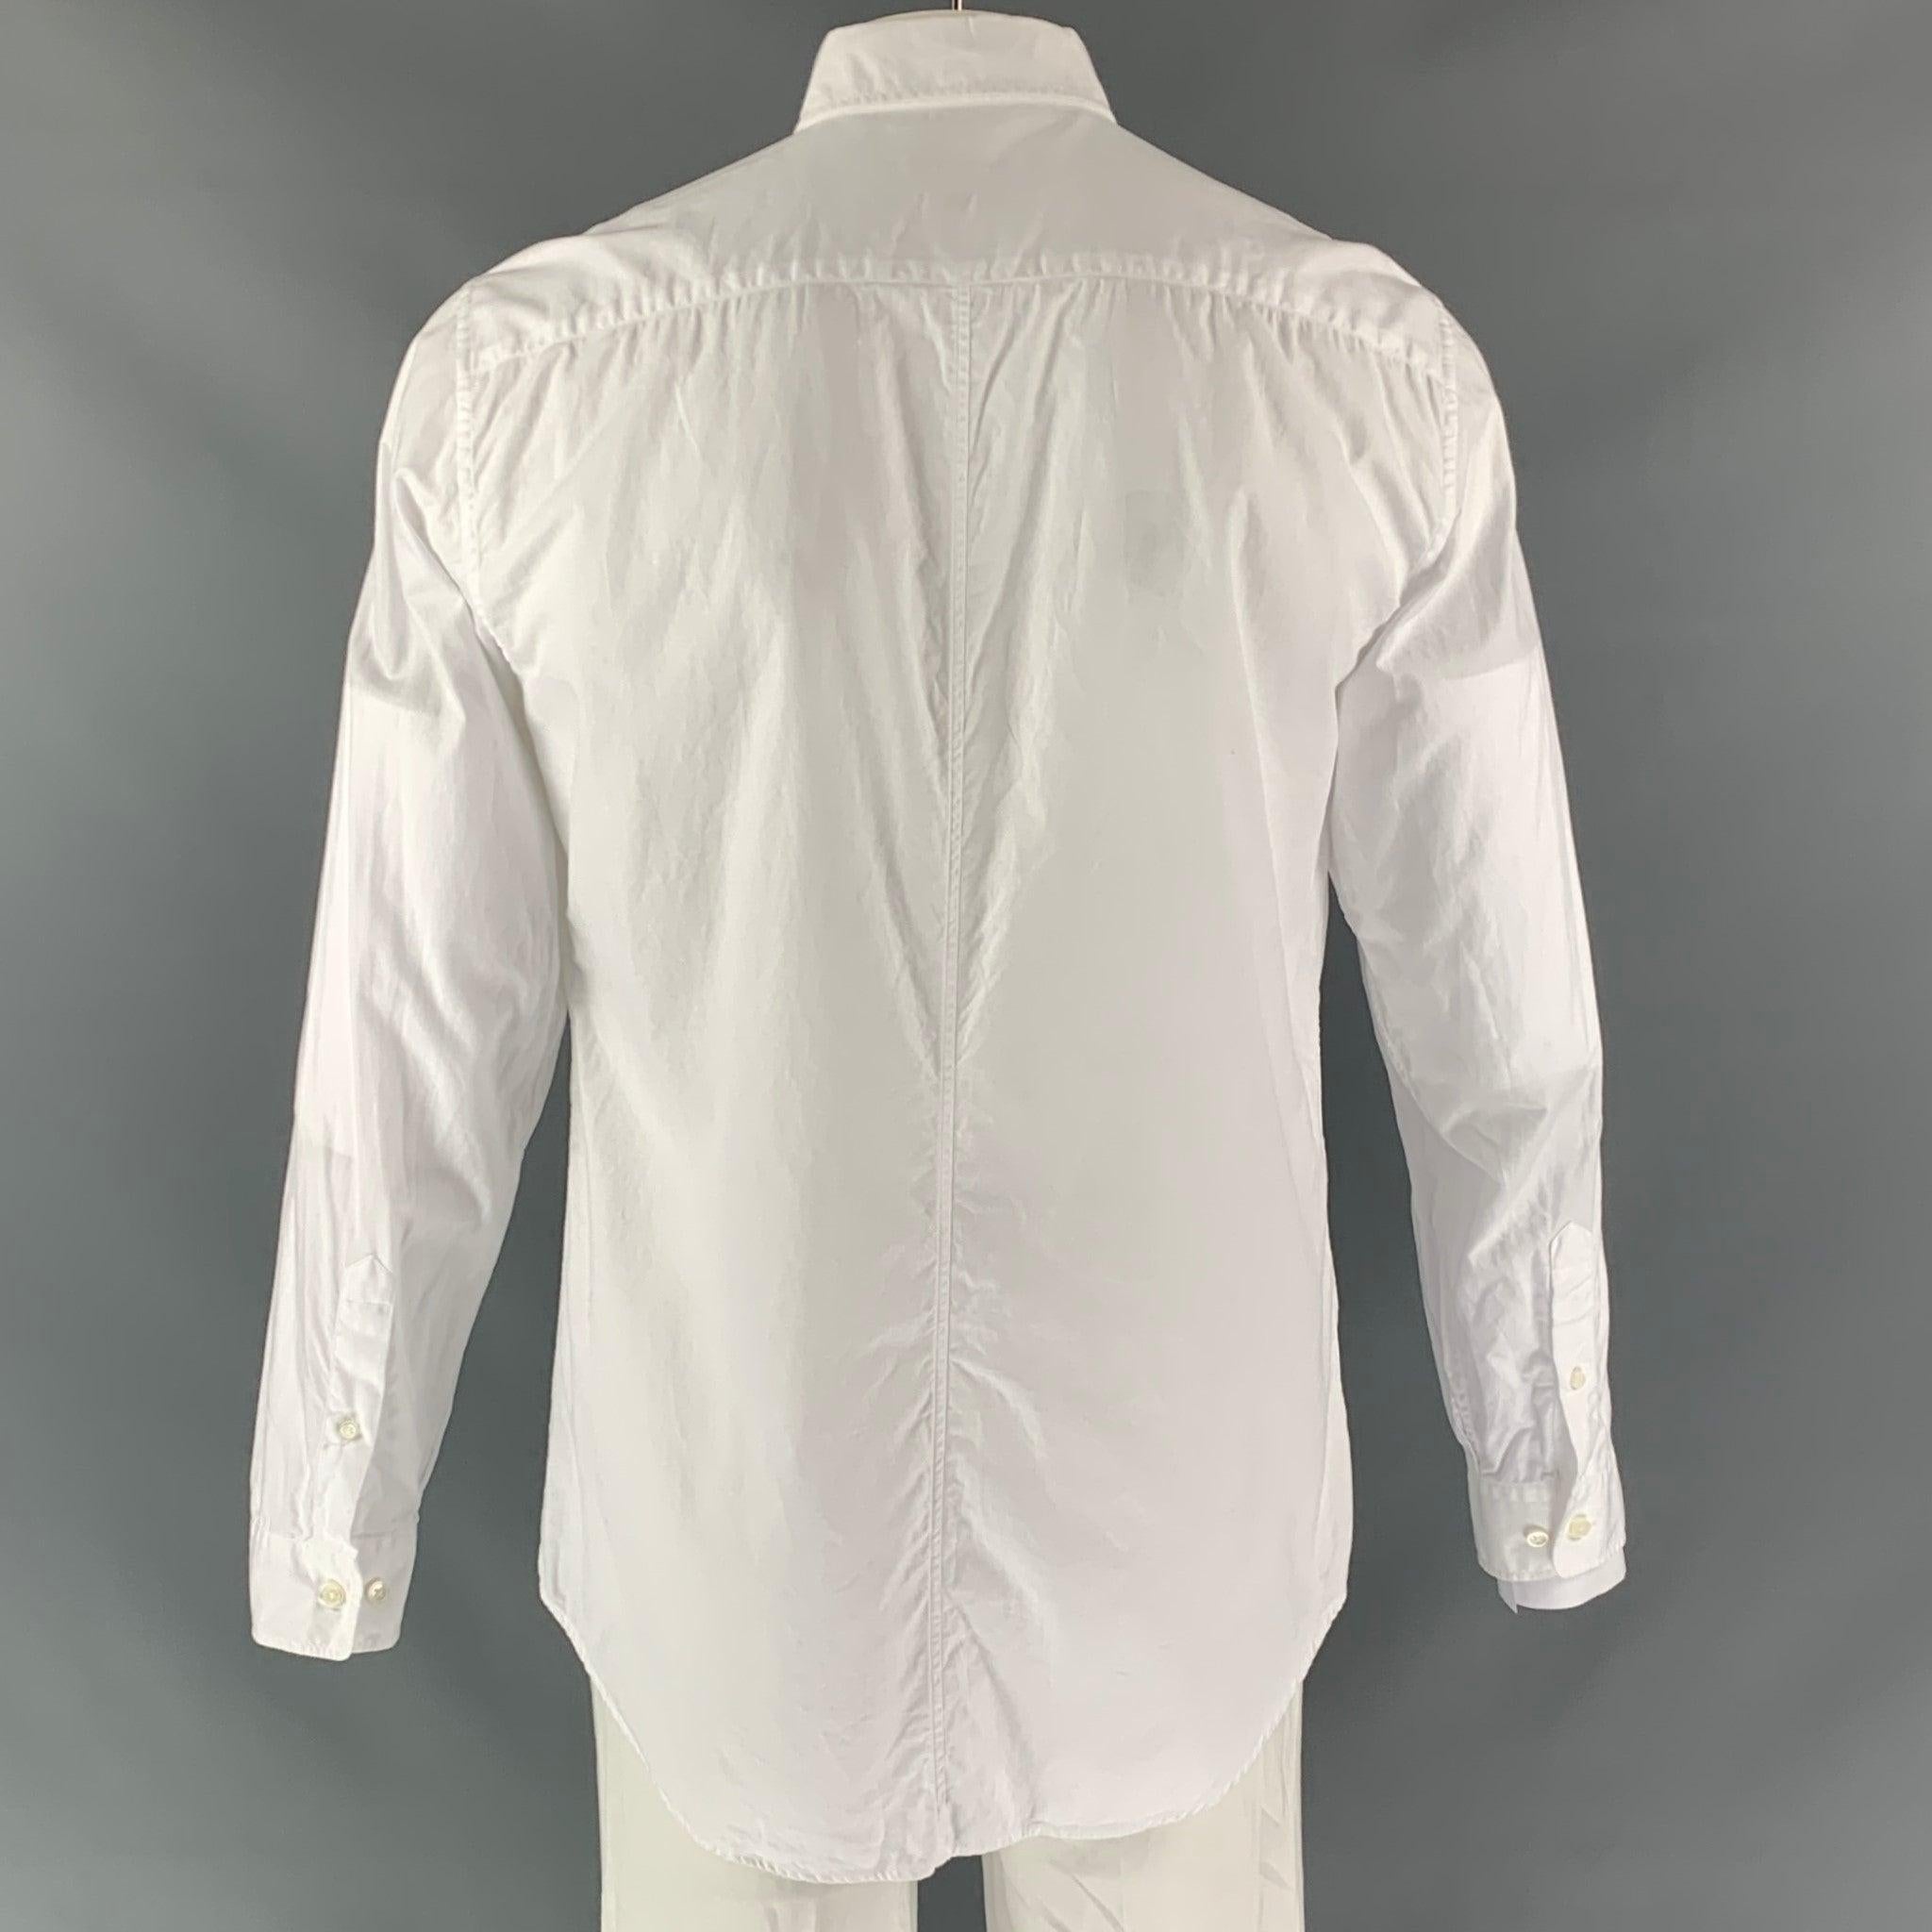 MARC JACOBS long sleeve dress shirt comes in white cotton fabric, button up closure, spread collar, removable collar stays and two button round sleeve cuff. Made in Italy.Excellent Pre-Owned Condition. 

Marked:   54 

Measurements: 
 
Shoulder: